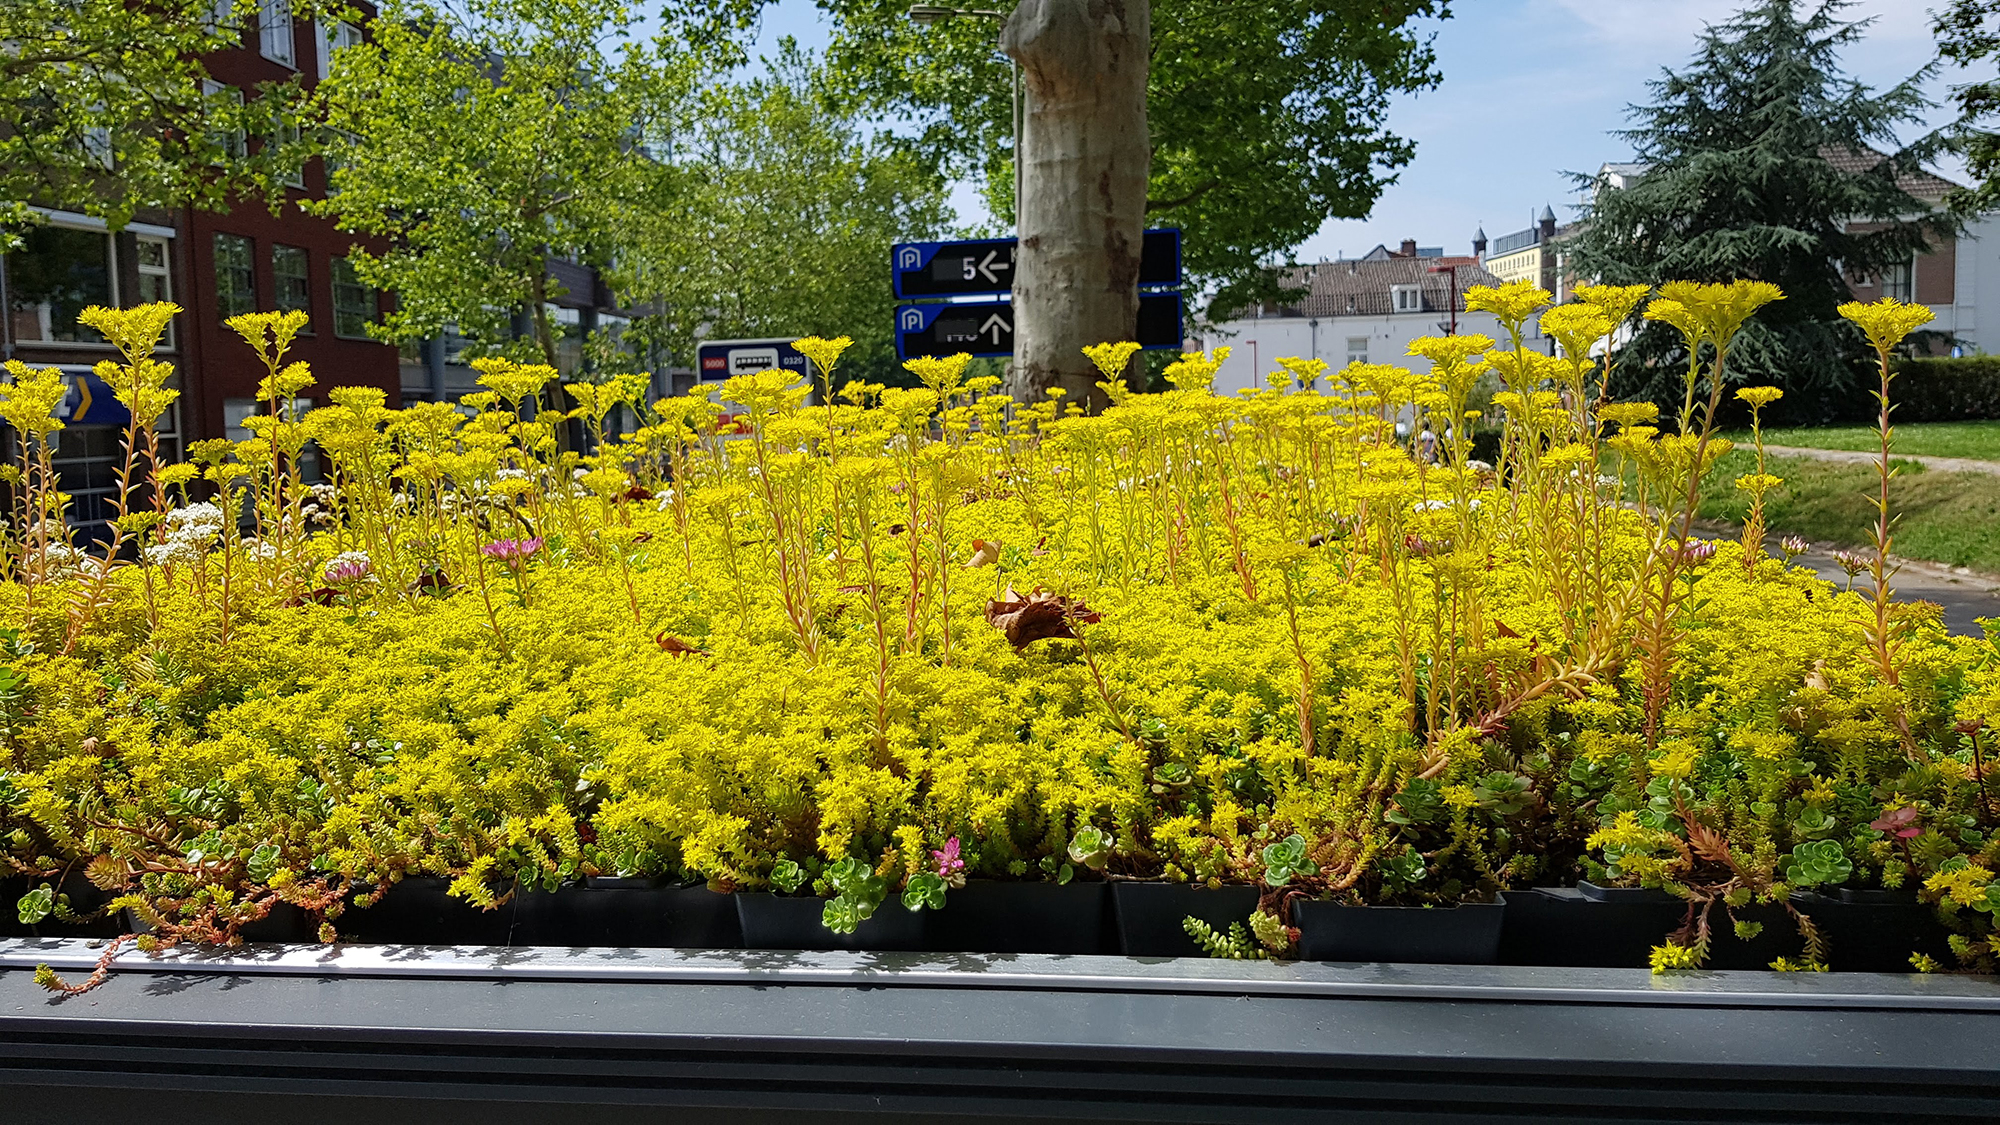 The roofs mainly have sedum plants. They are maintained by municipal workers who drive around in electric vehicles.